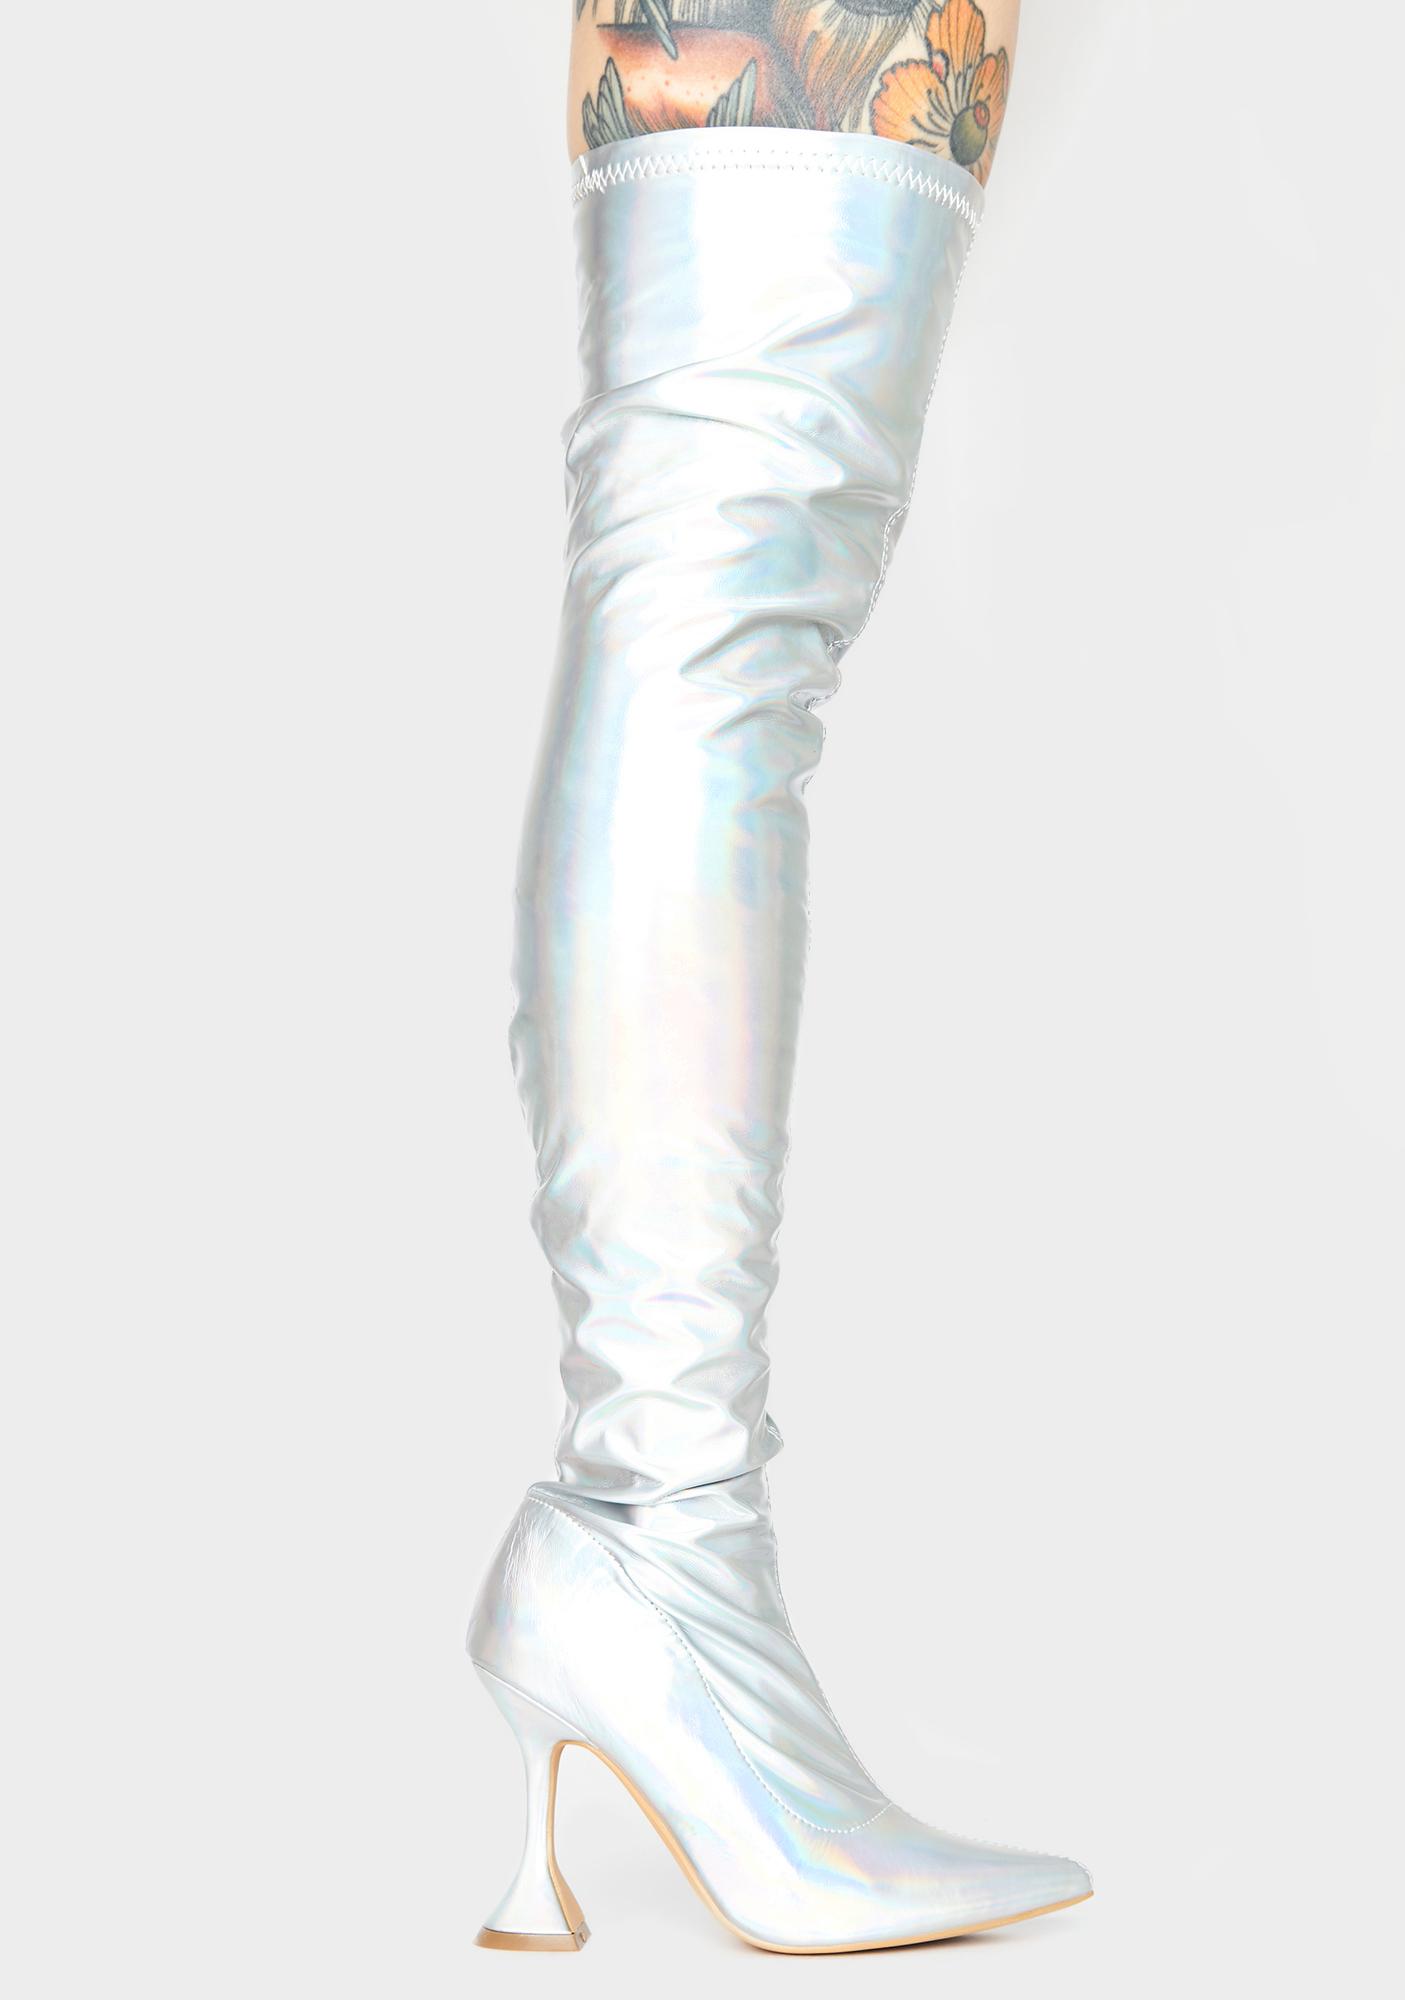 thigh high holographic boots